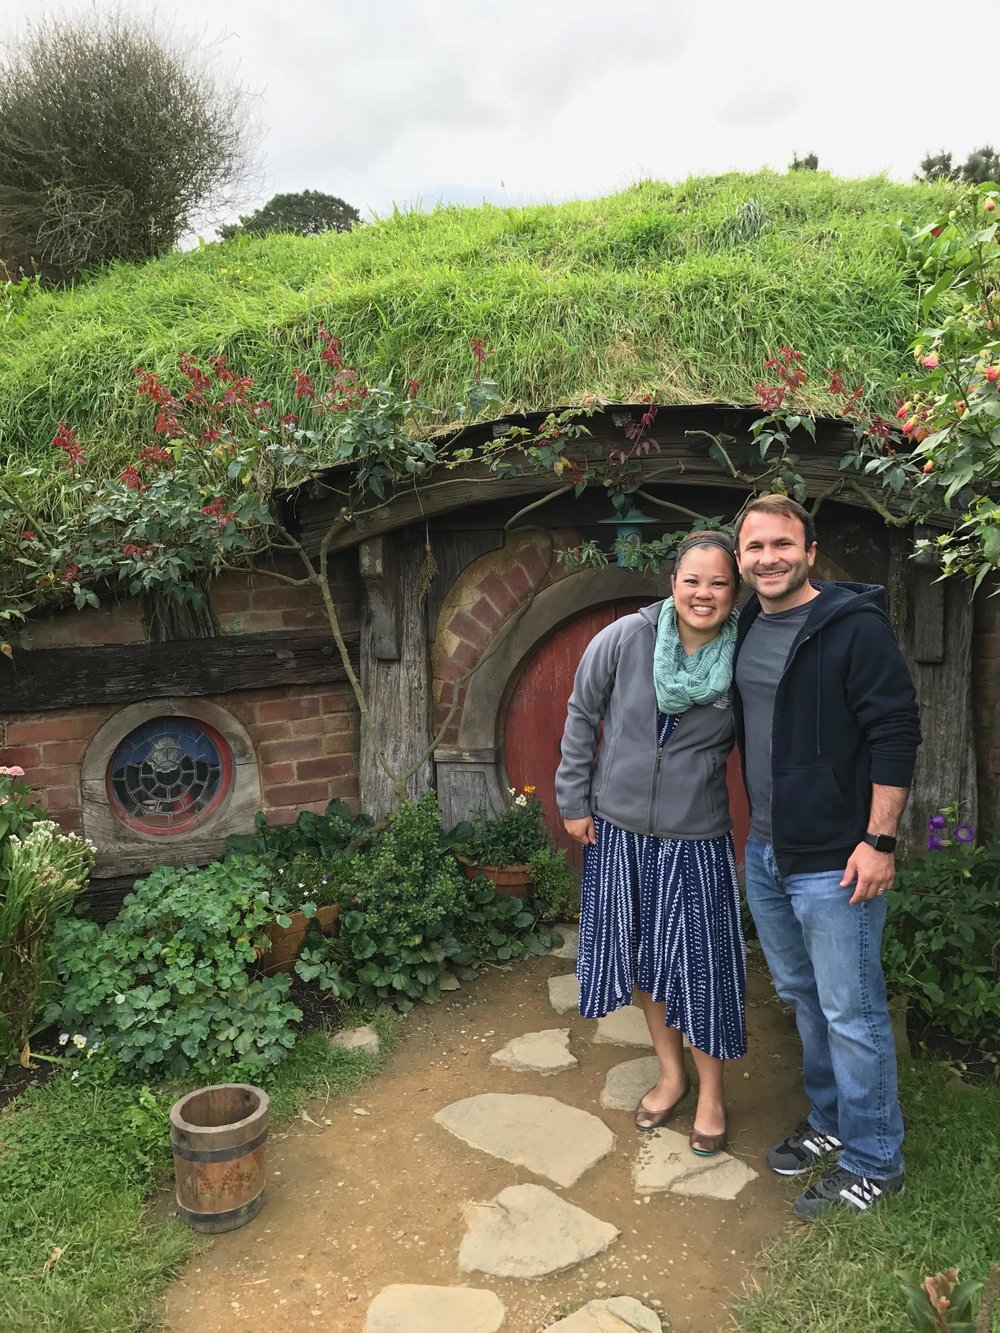 Visiting the Shire!